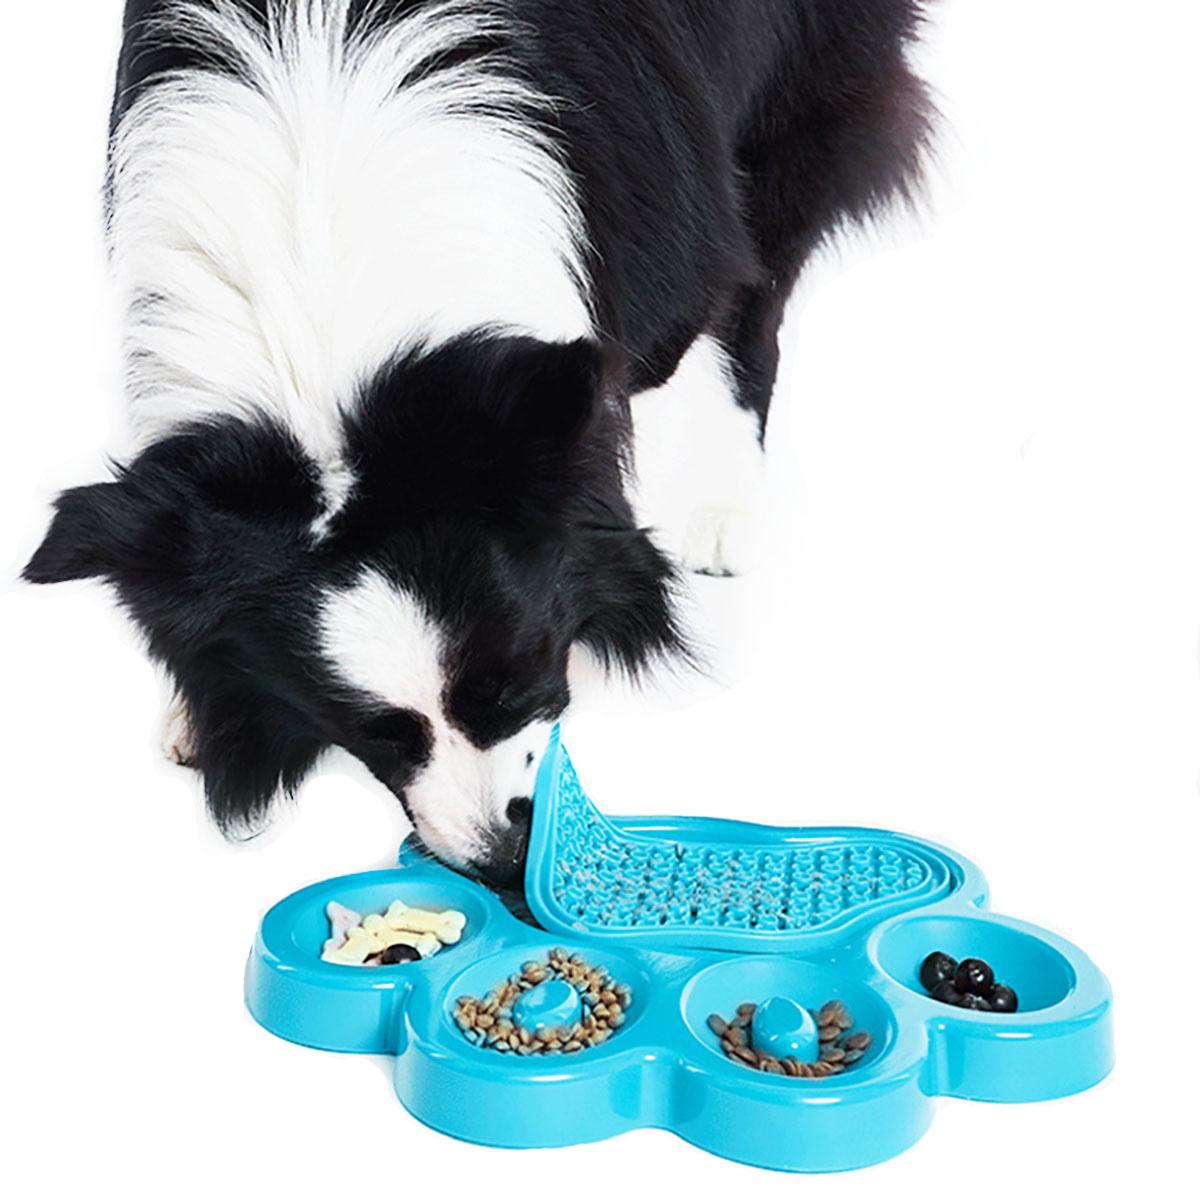 https://images.baxterboo.com/global/images/products/large/petdreamhouse-paw-2-in-1-slow-feeder-pet-bowl-green-8171.jpg